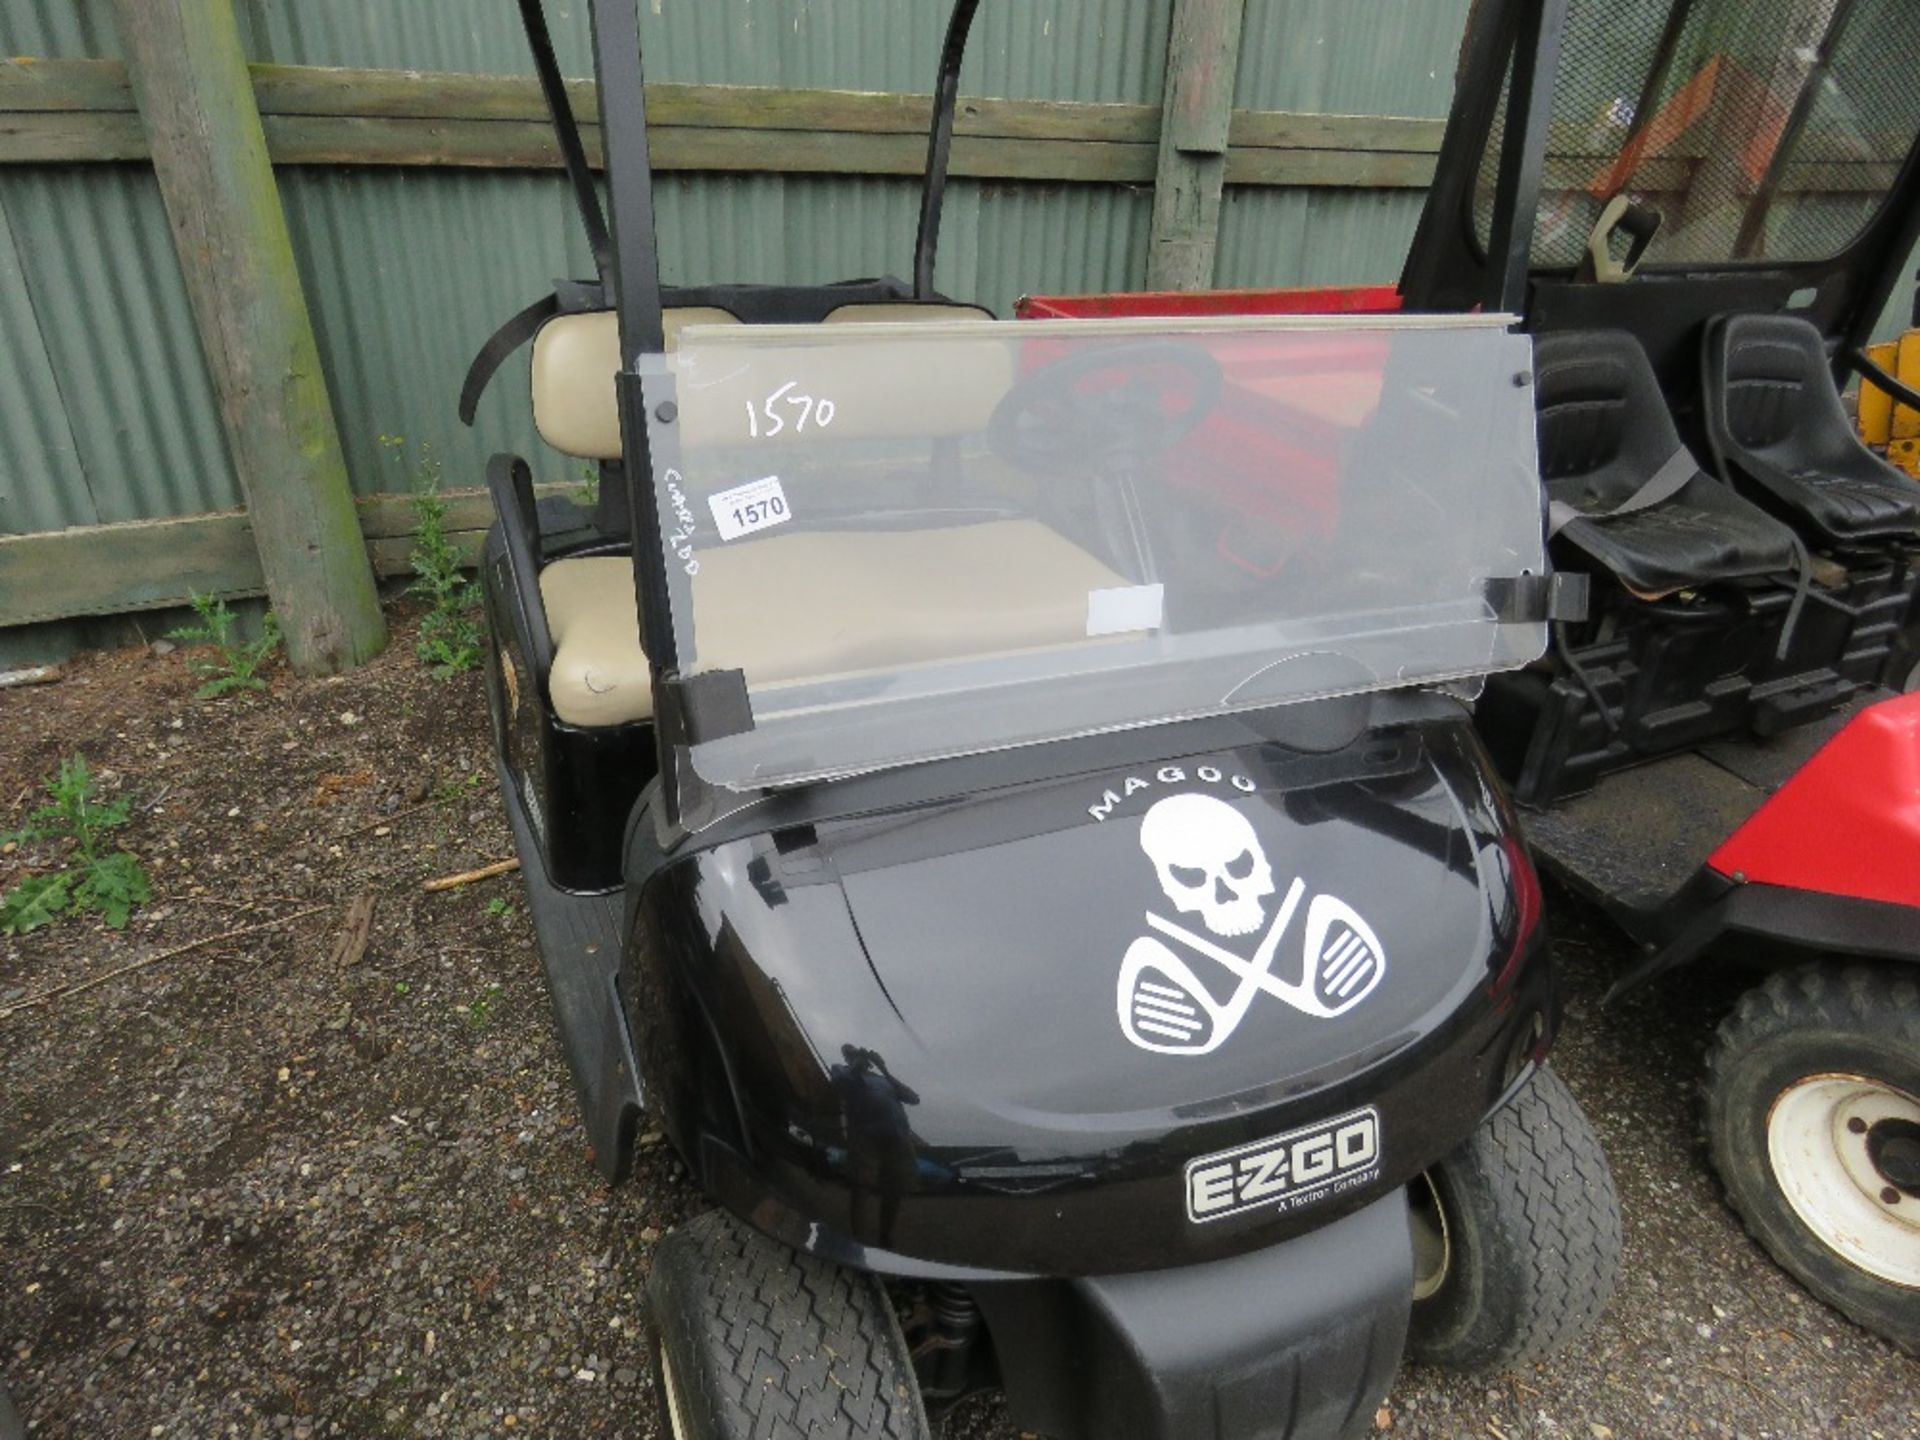 EZGO RXV PETROL ENGINED GOLF BUGGY, YEAR 2013. SN:5201684. WHEN TESTED WAS SEEN TO RUN AND DRIVE, ST